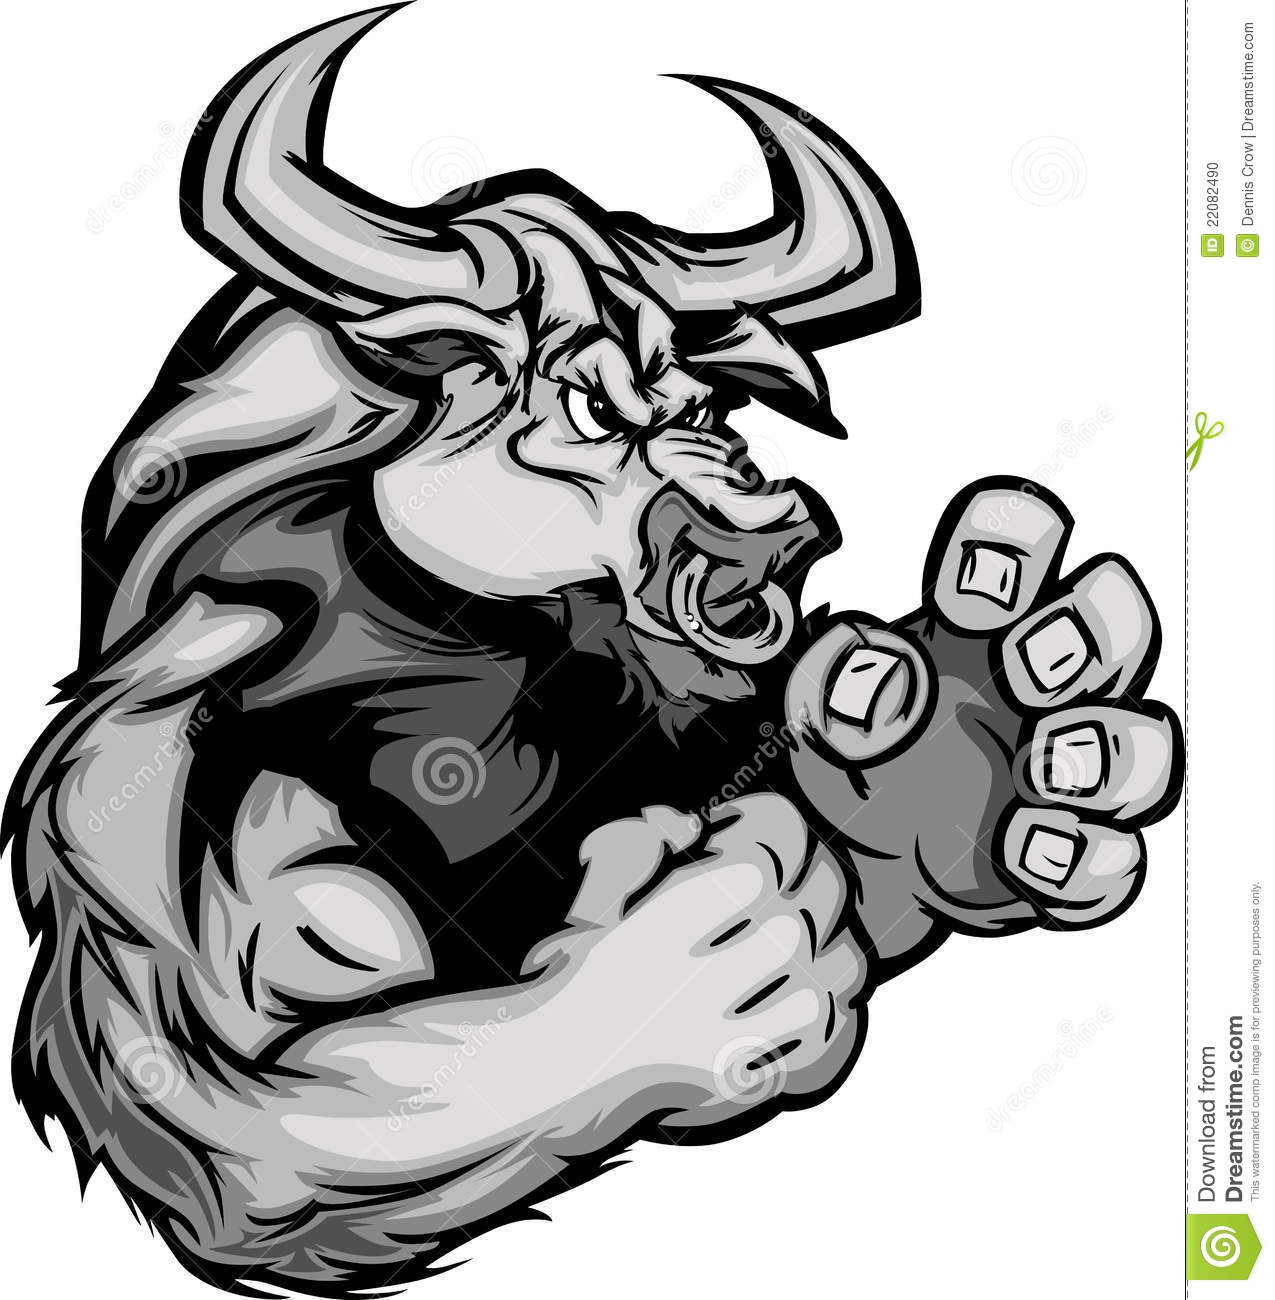 More Similar Stock Images Of   Bull Cow Mascot With Fighting Hands  